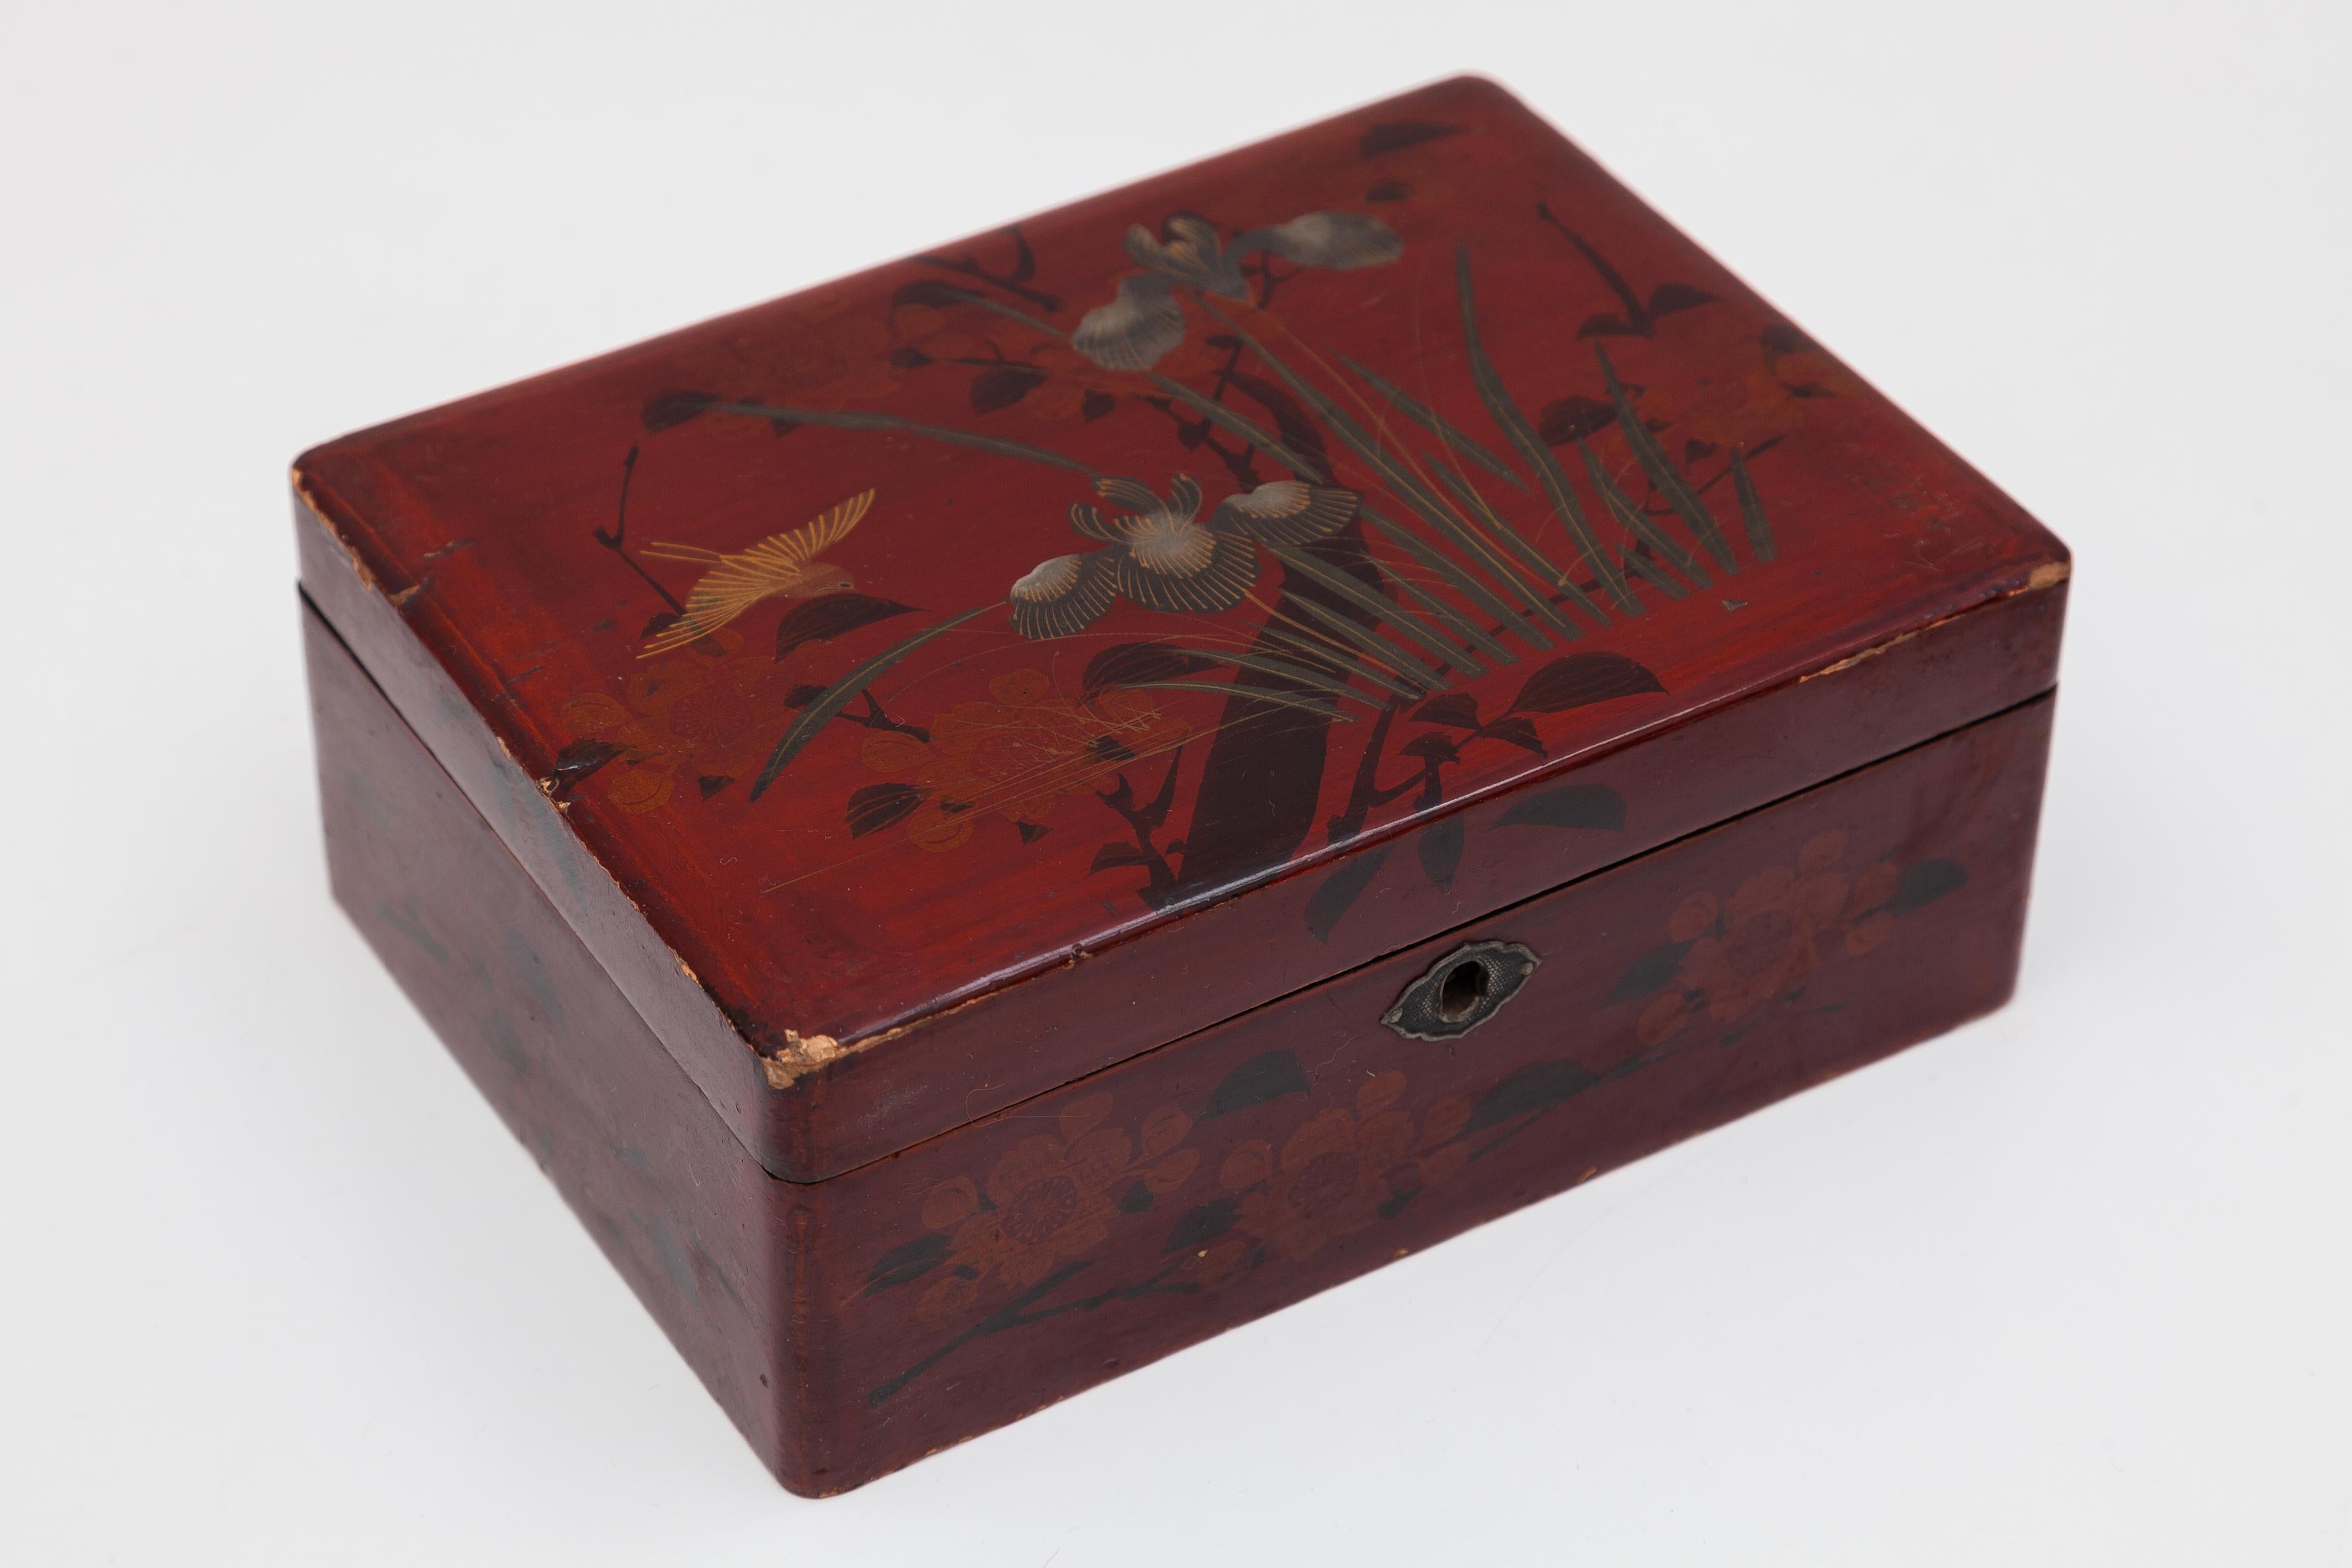 Early 20th Century Japanese Lacquered Boxes Collection, Wunderkammer Objects